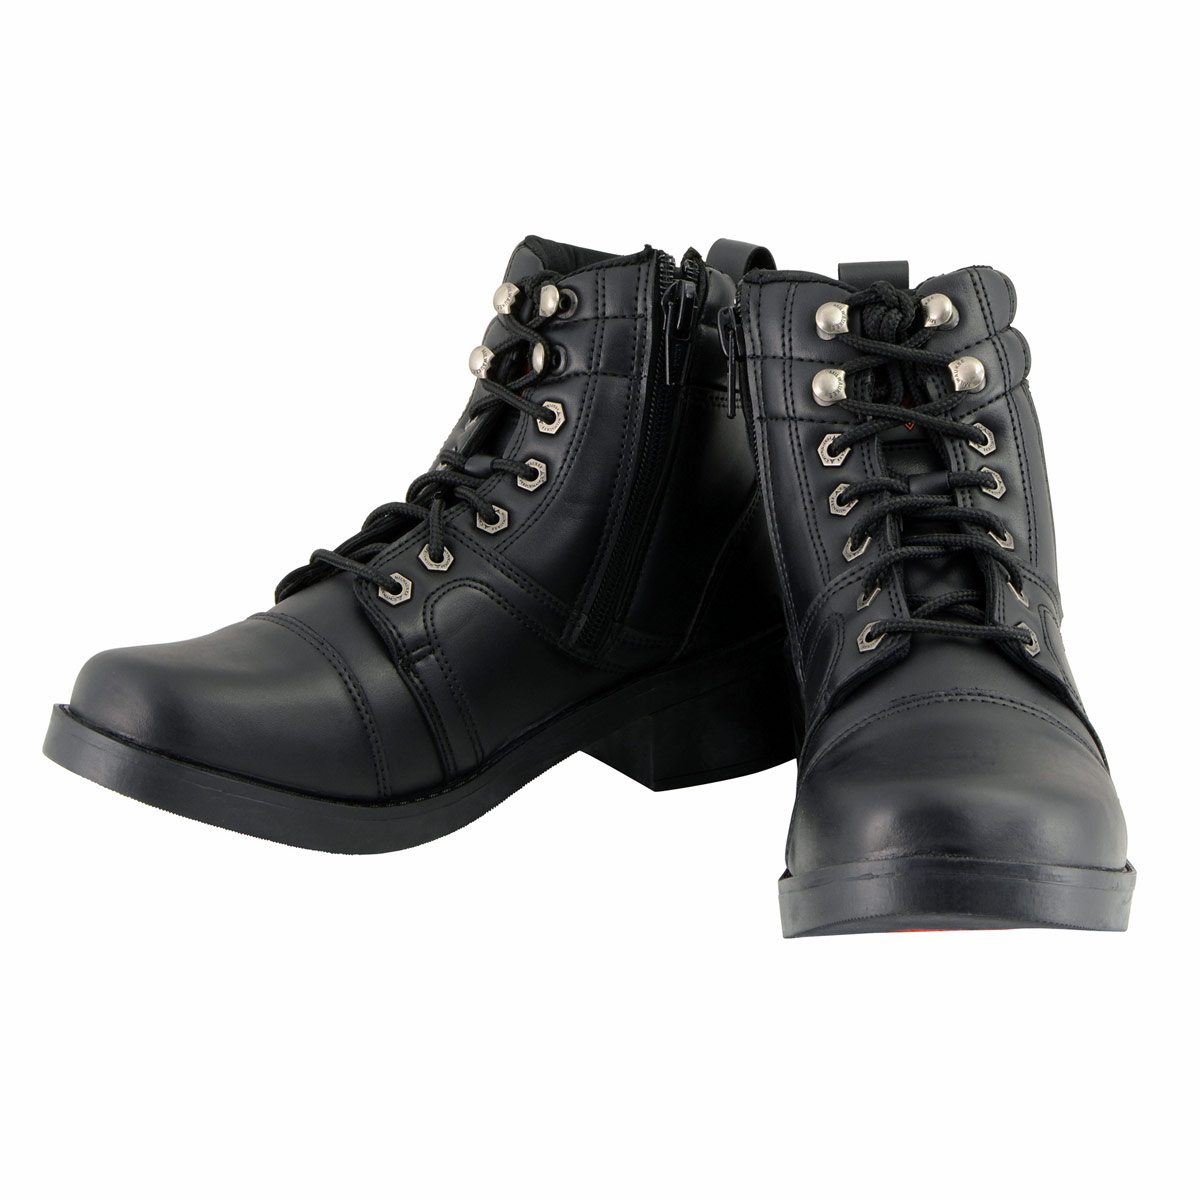 Milwaukee Leather MBK9255 Boys Black Lace-Up Boots with Side Zipper Entry 6 - image 3 of 9